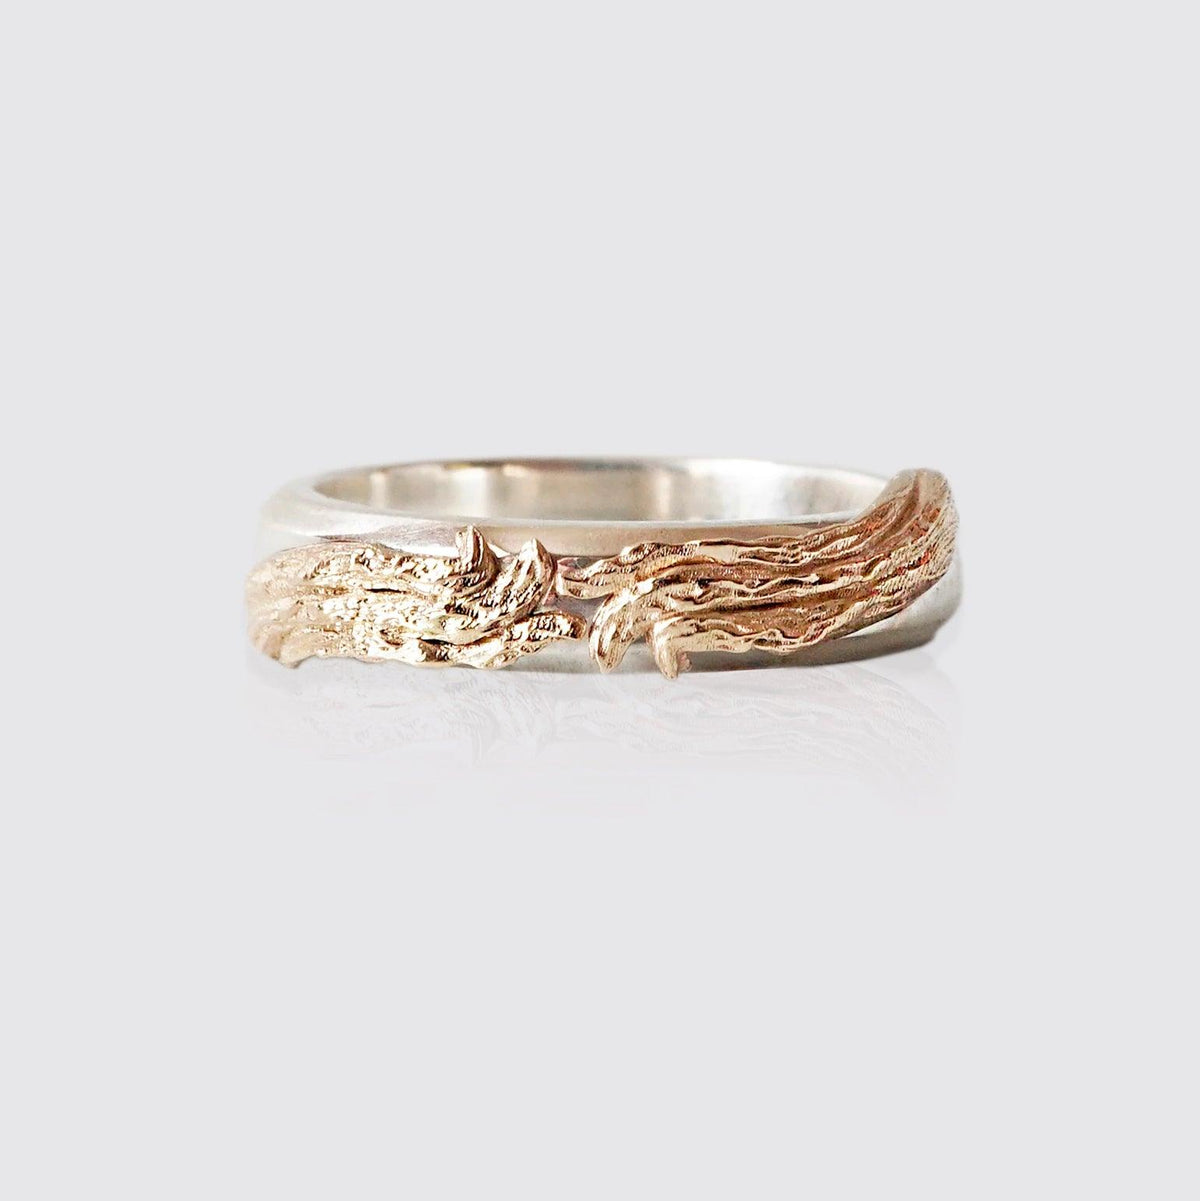 Mixed Metal Tree Branch Ring in Sterling Silver and 14K Gold, 5mm - Tippy Taste Jewelry